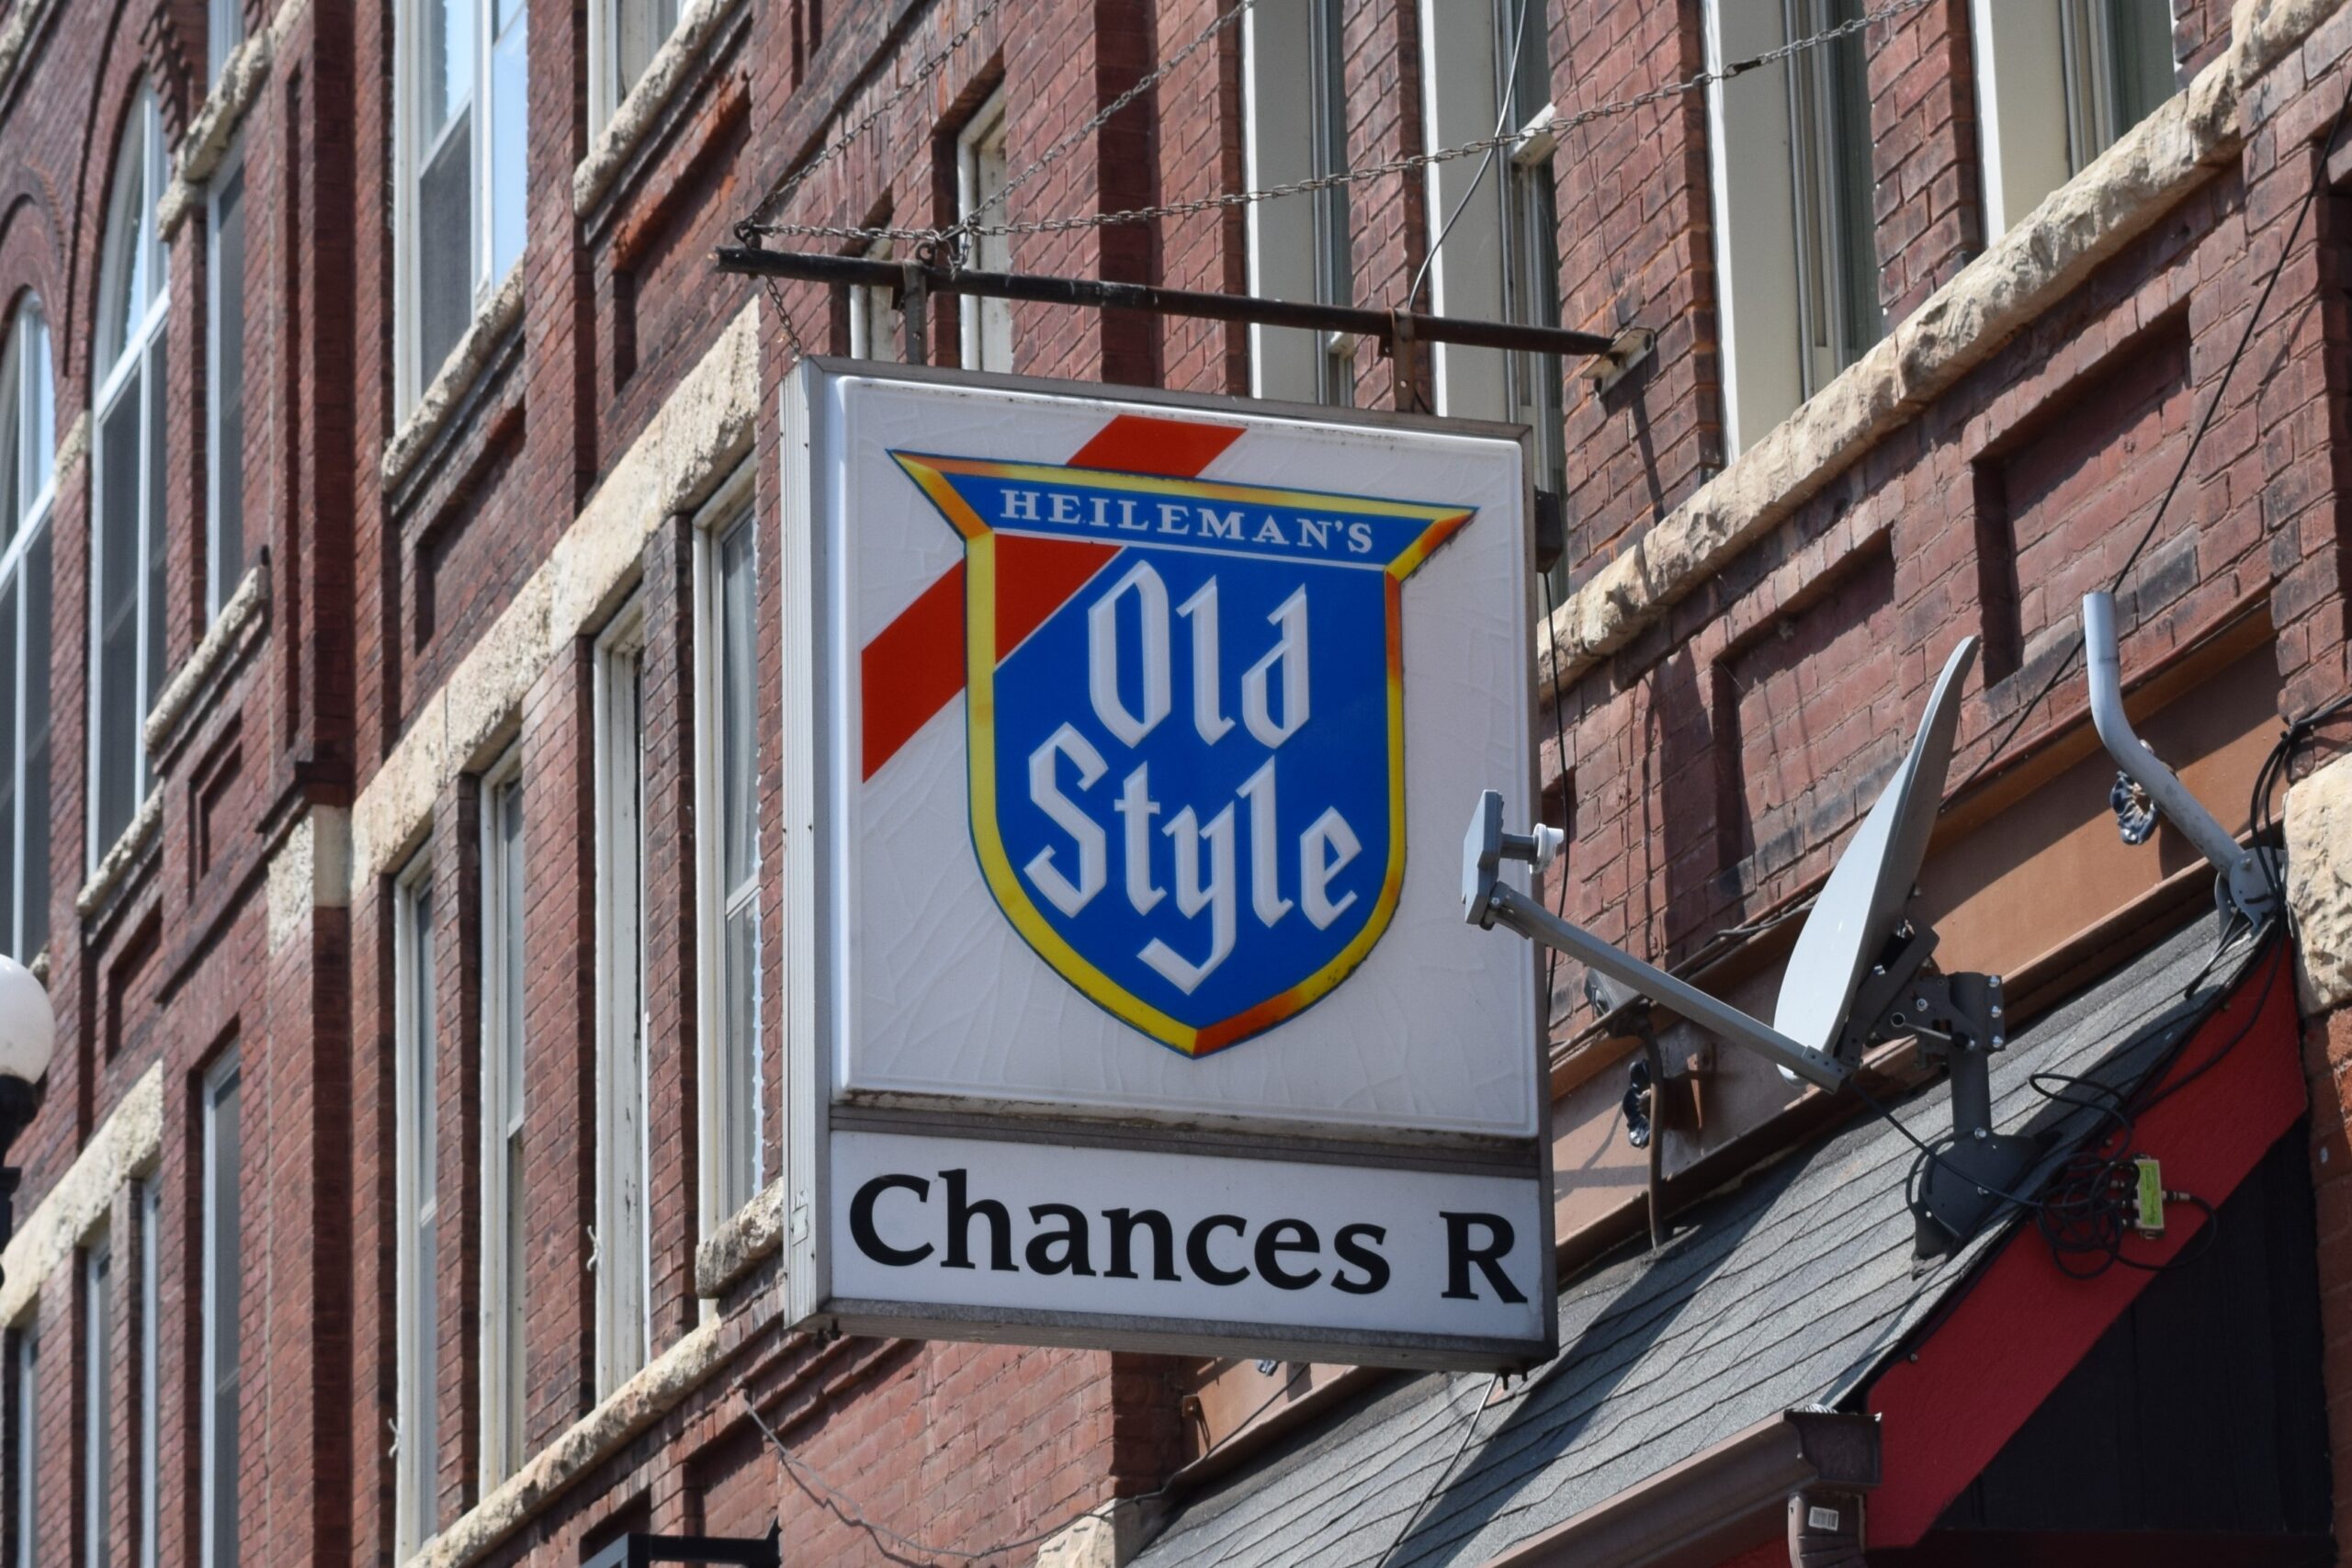 A white sign with the blue Old Style logo hangs from a brick building